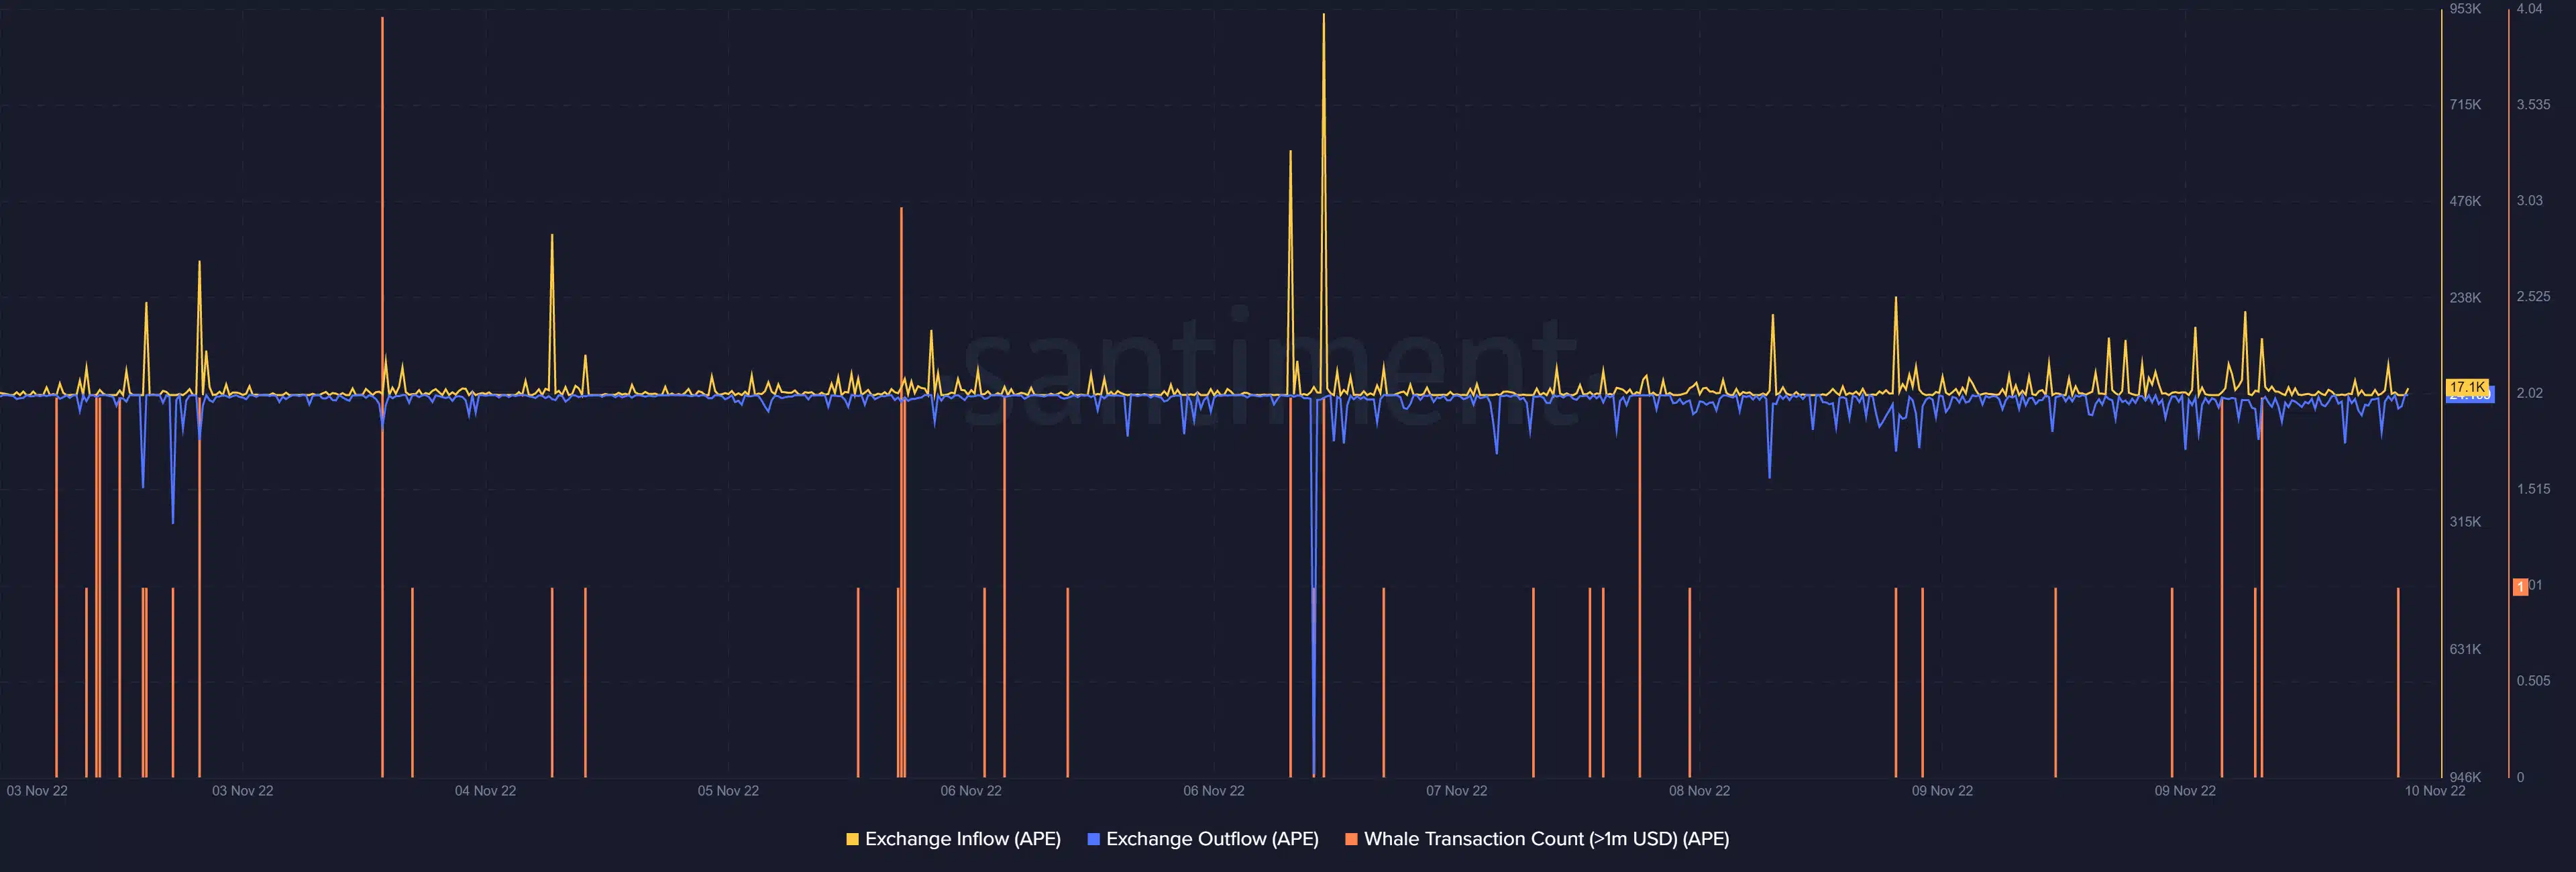 APE exchange flows and whale transaction count